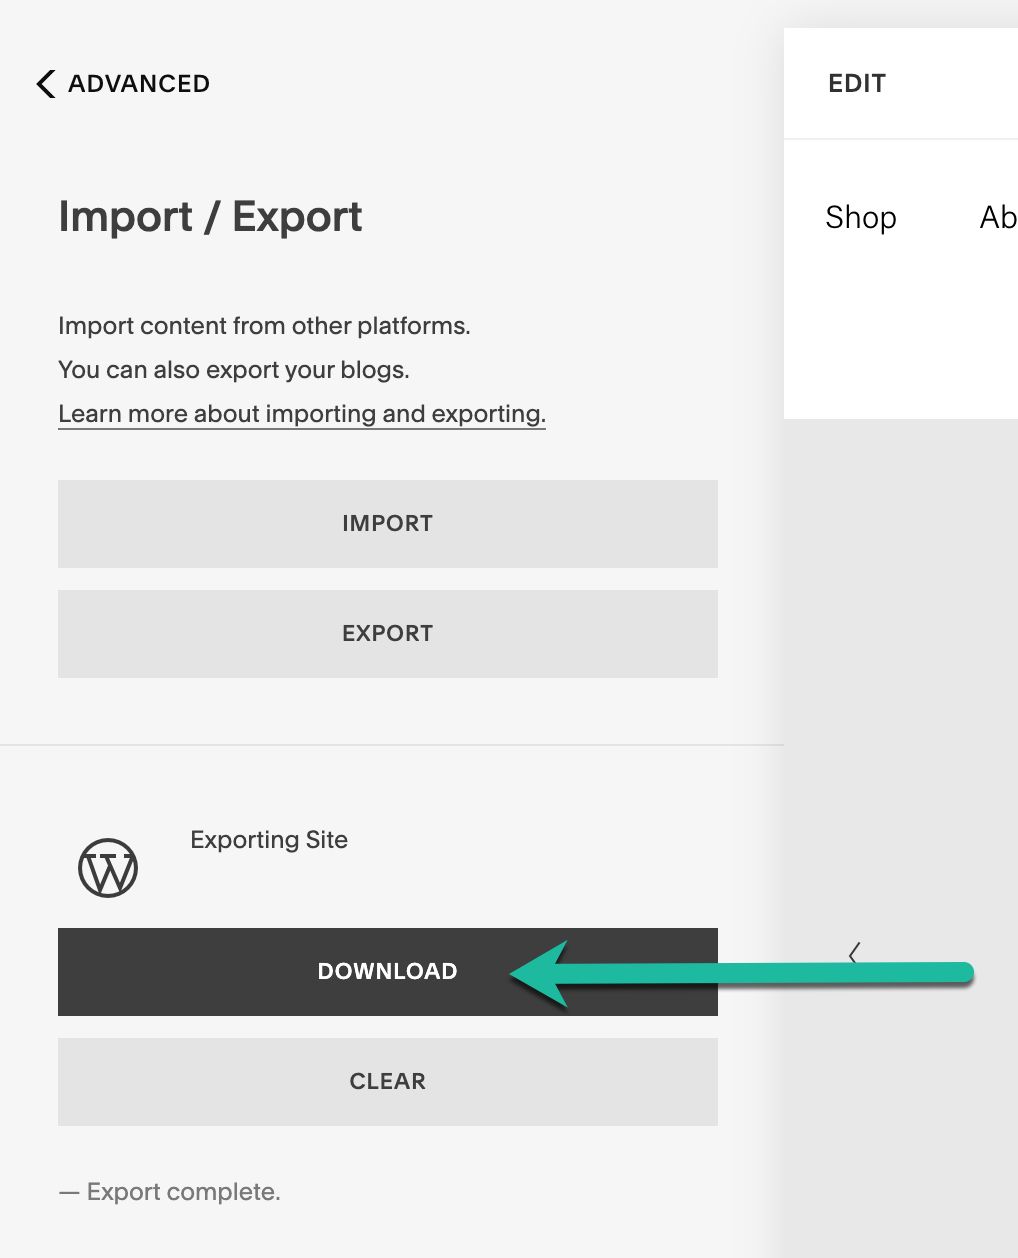 Once the export is complete, a Download button and a Clear button appear in place of the progress bar.